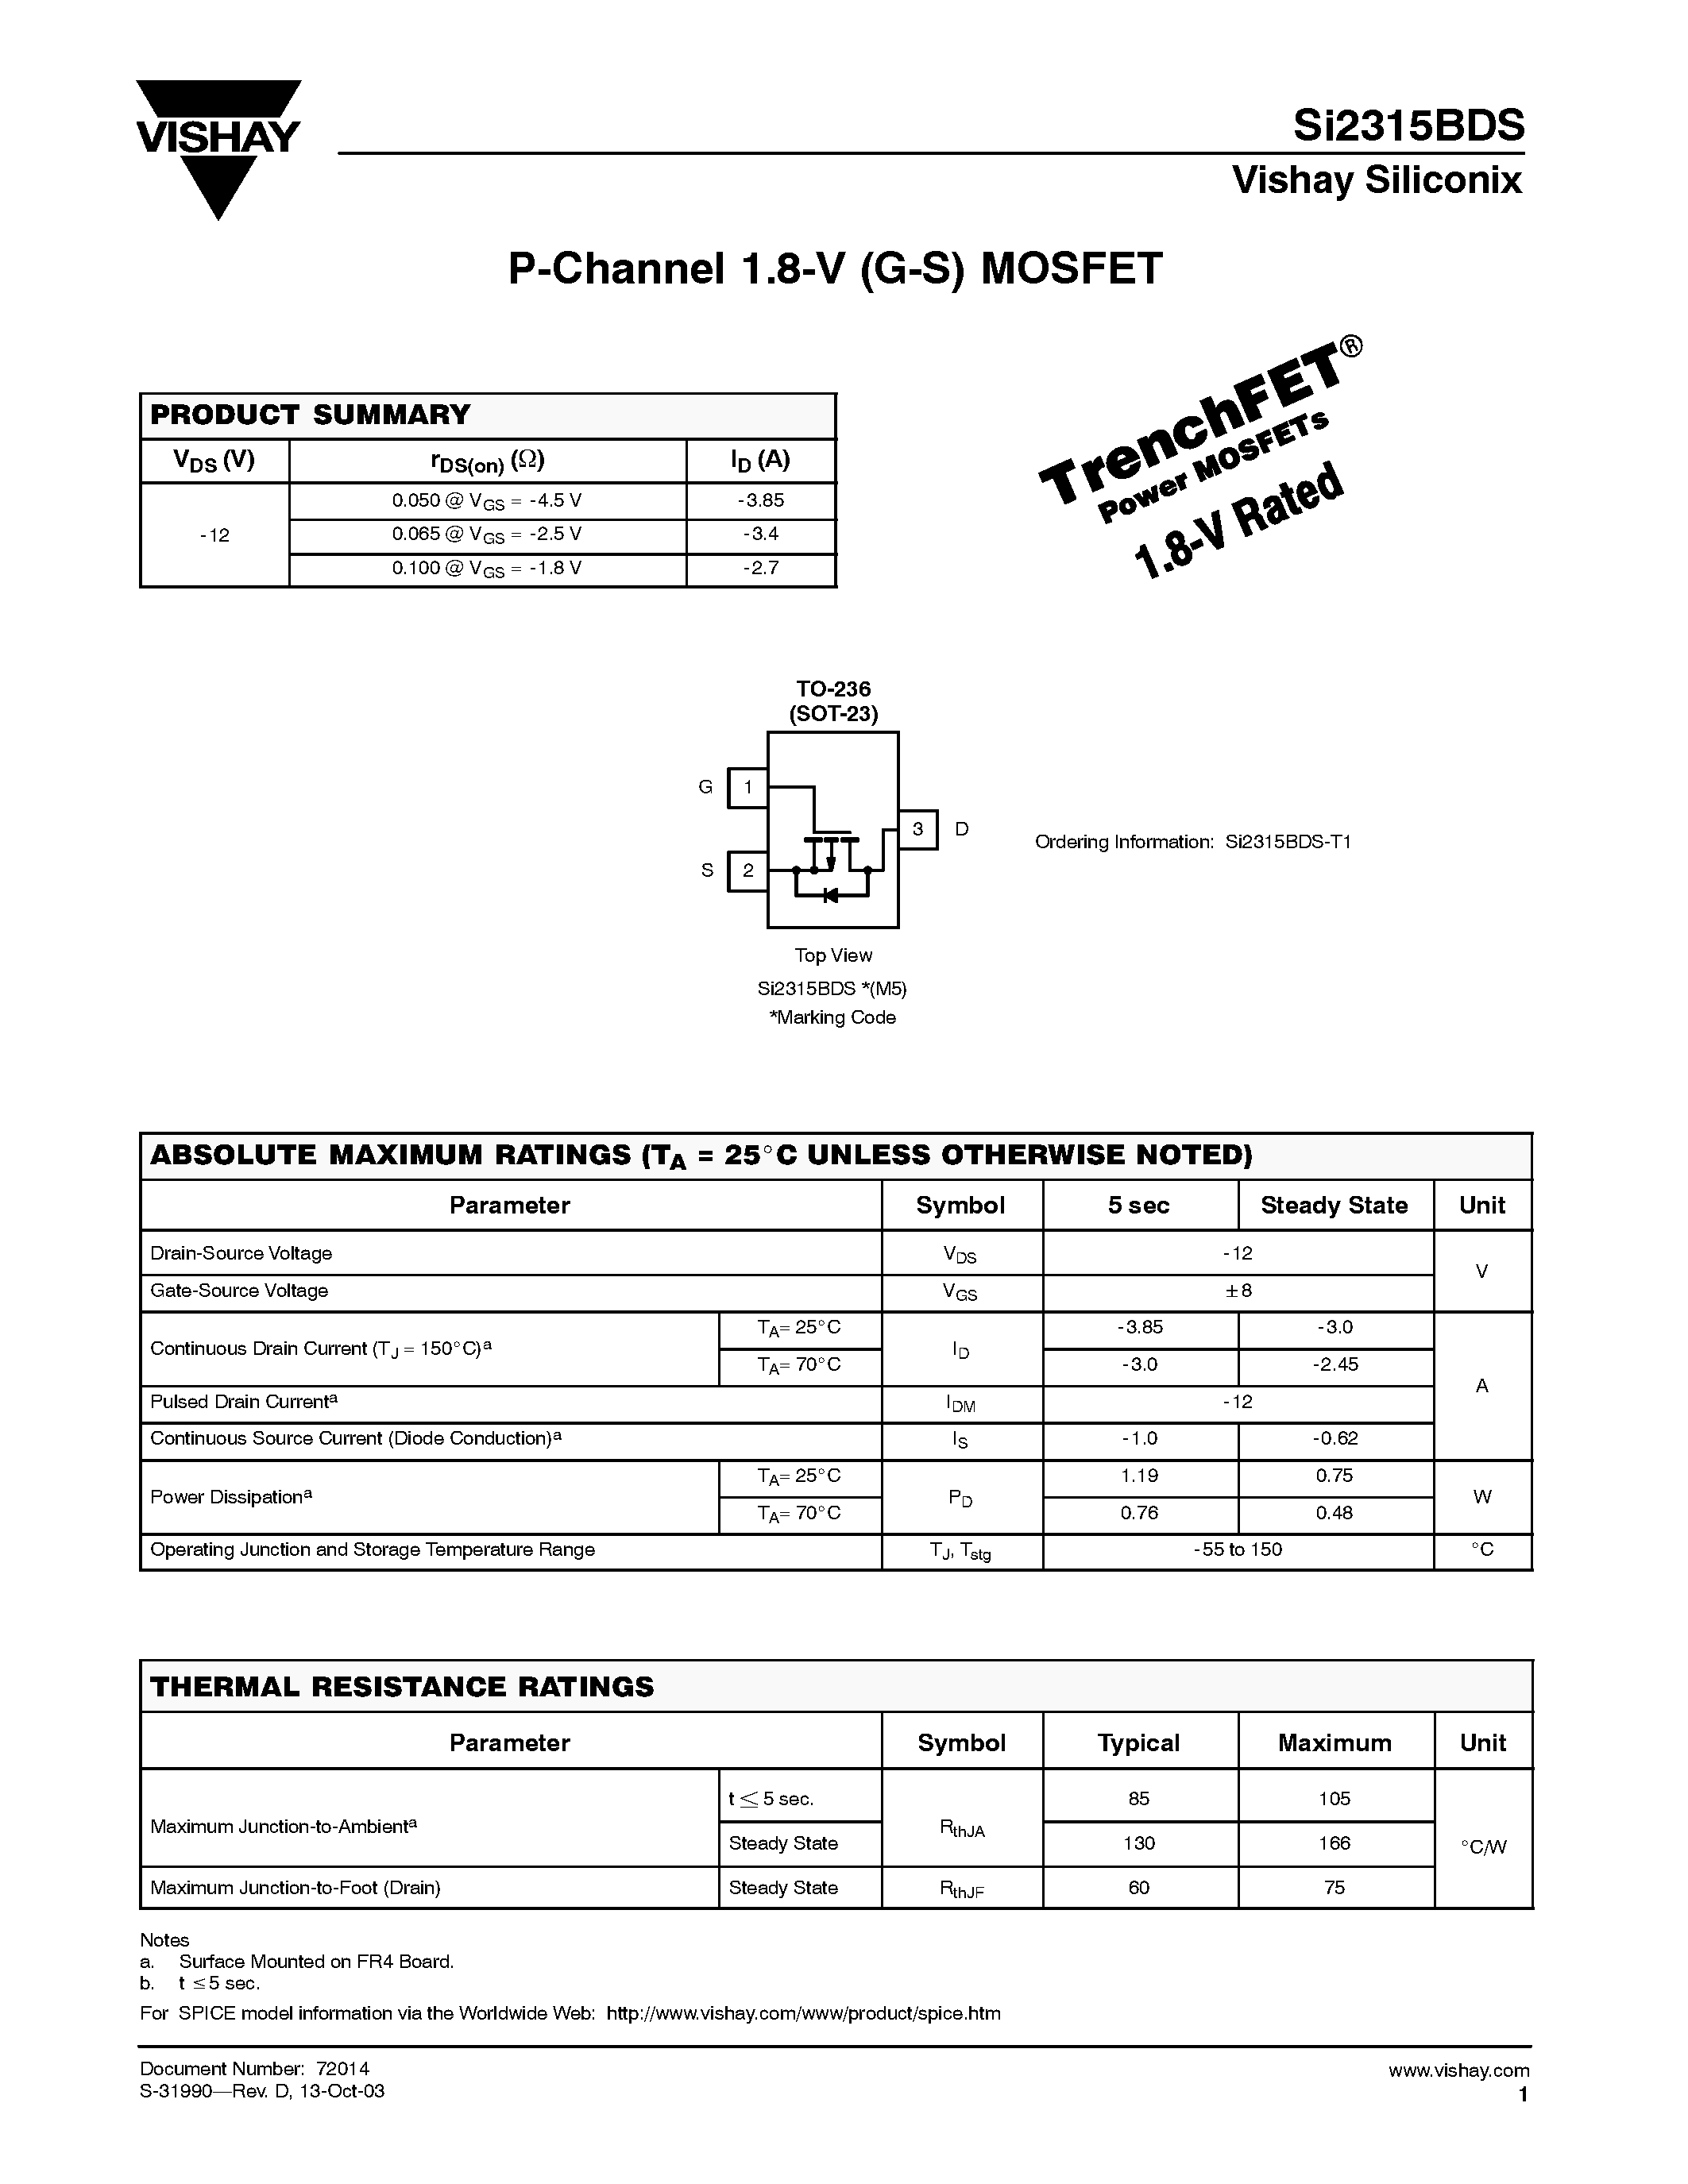 Datasheet SI2315BDS - P-Channel 1.8-V (G-S) MOSFET page 1